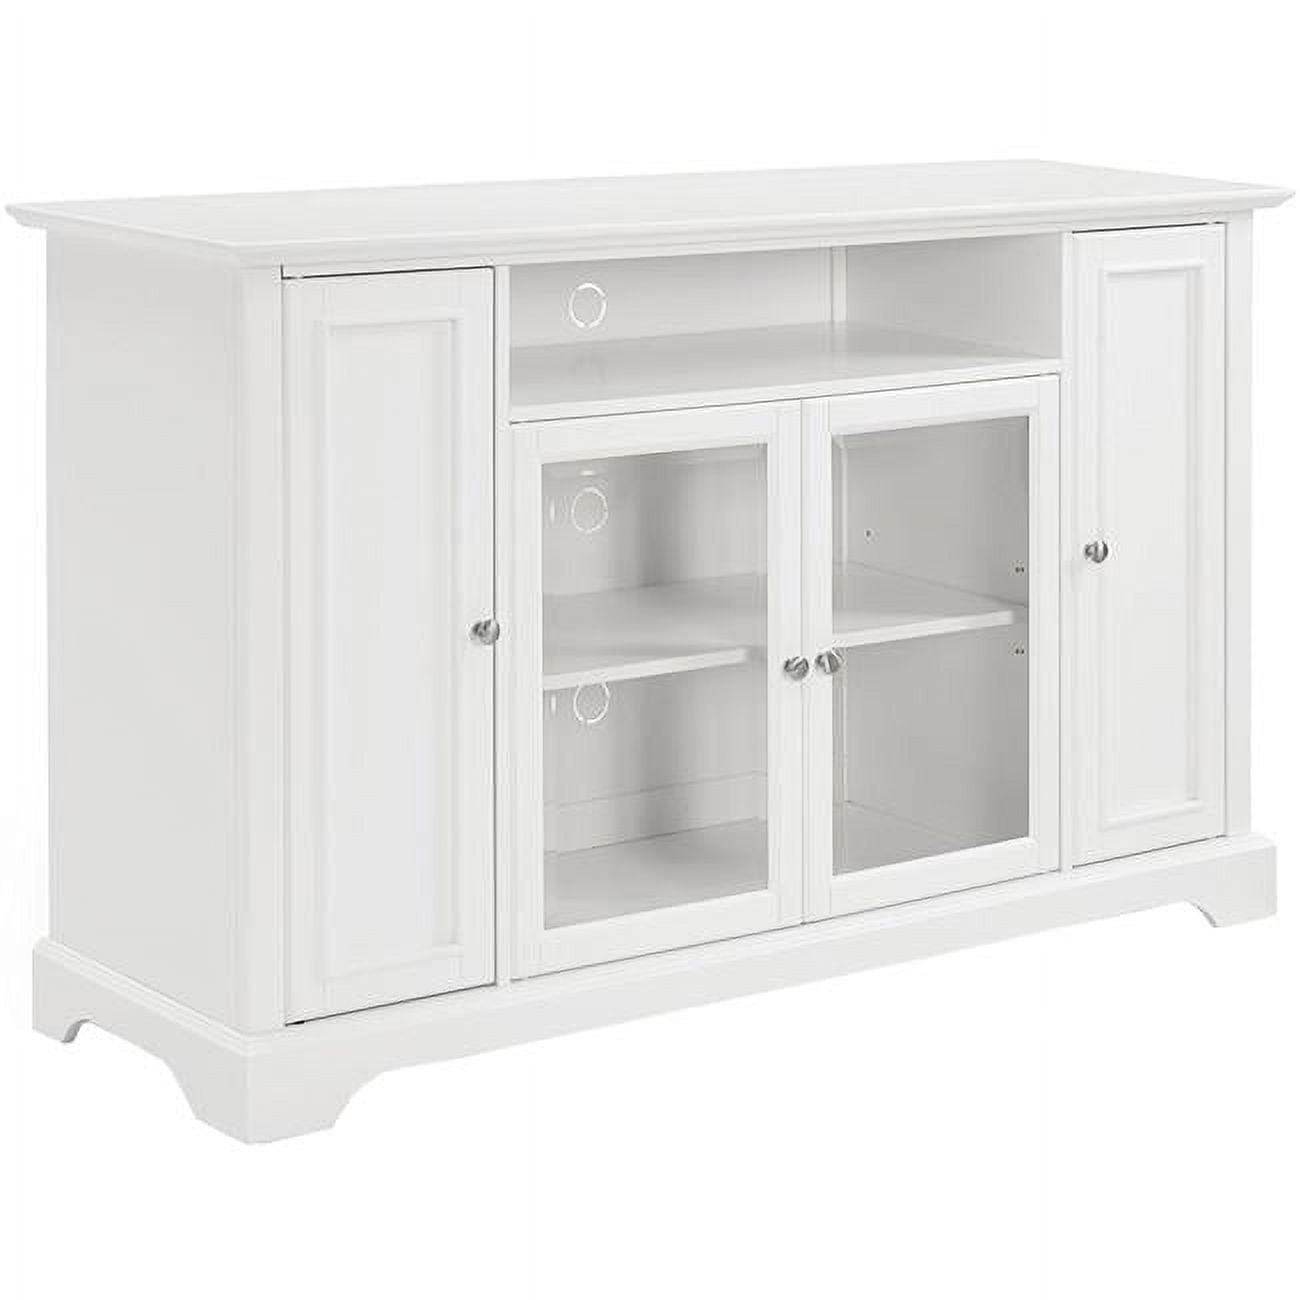 Campbell Classic White 60" TV Stand with Adjustable Shelving